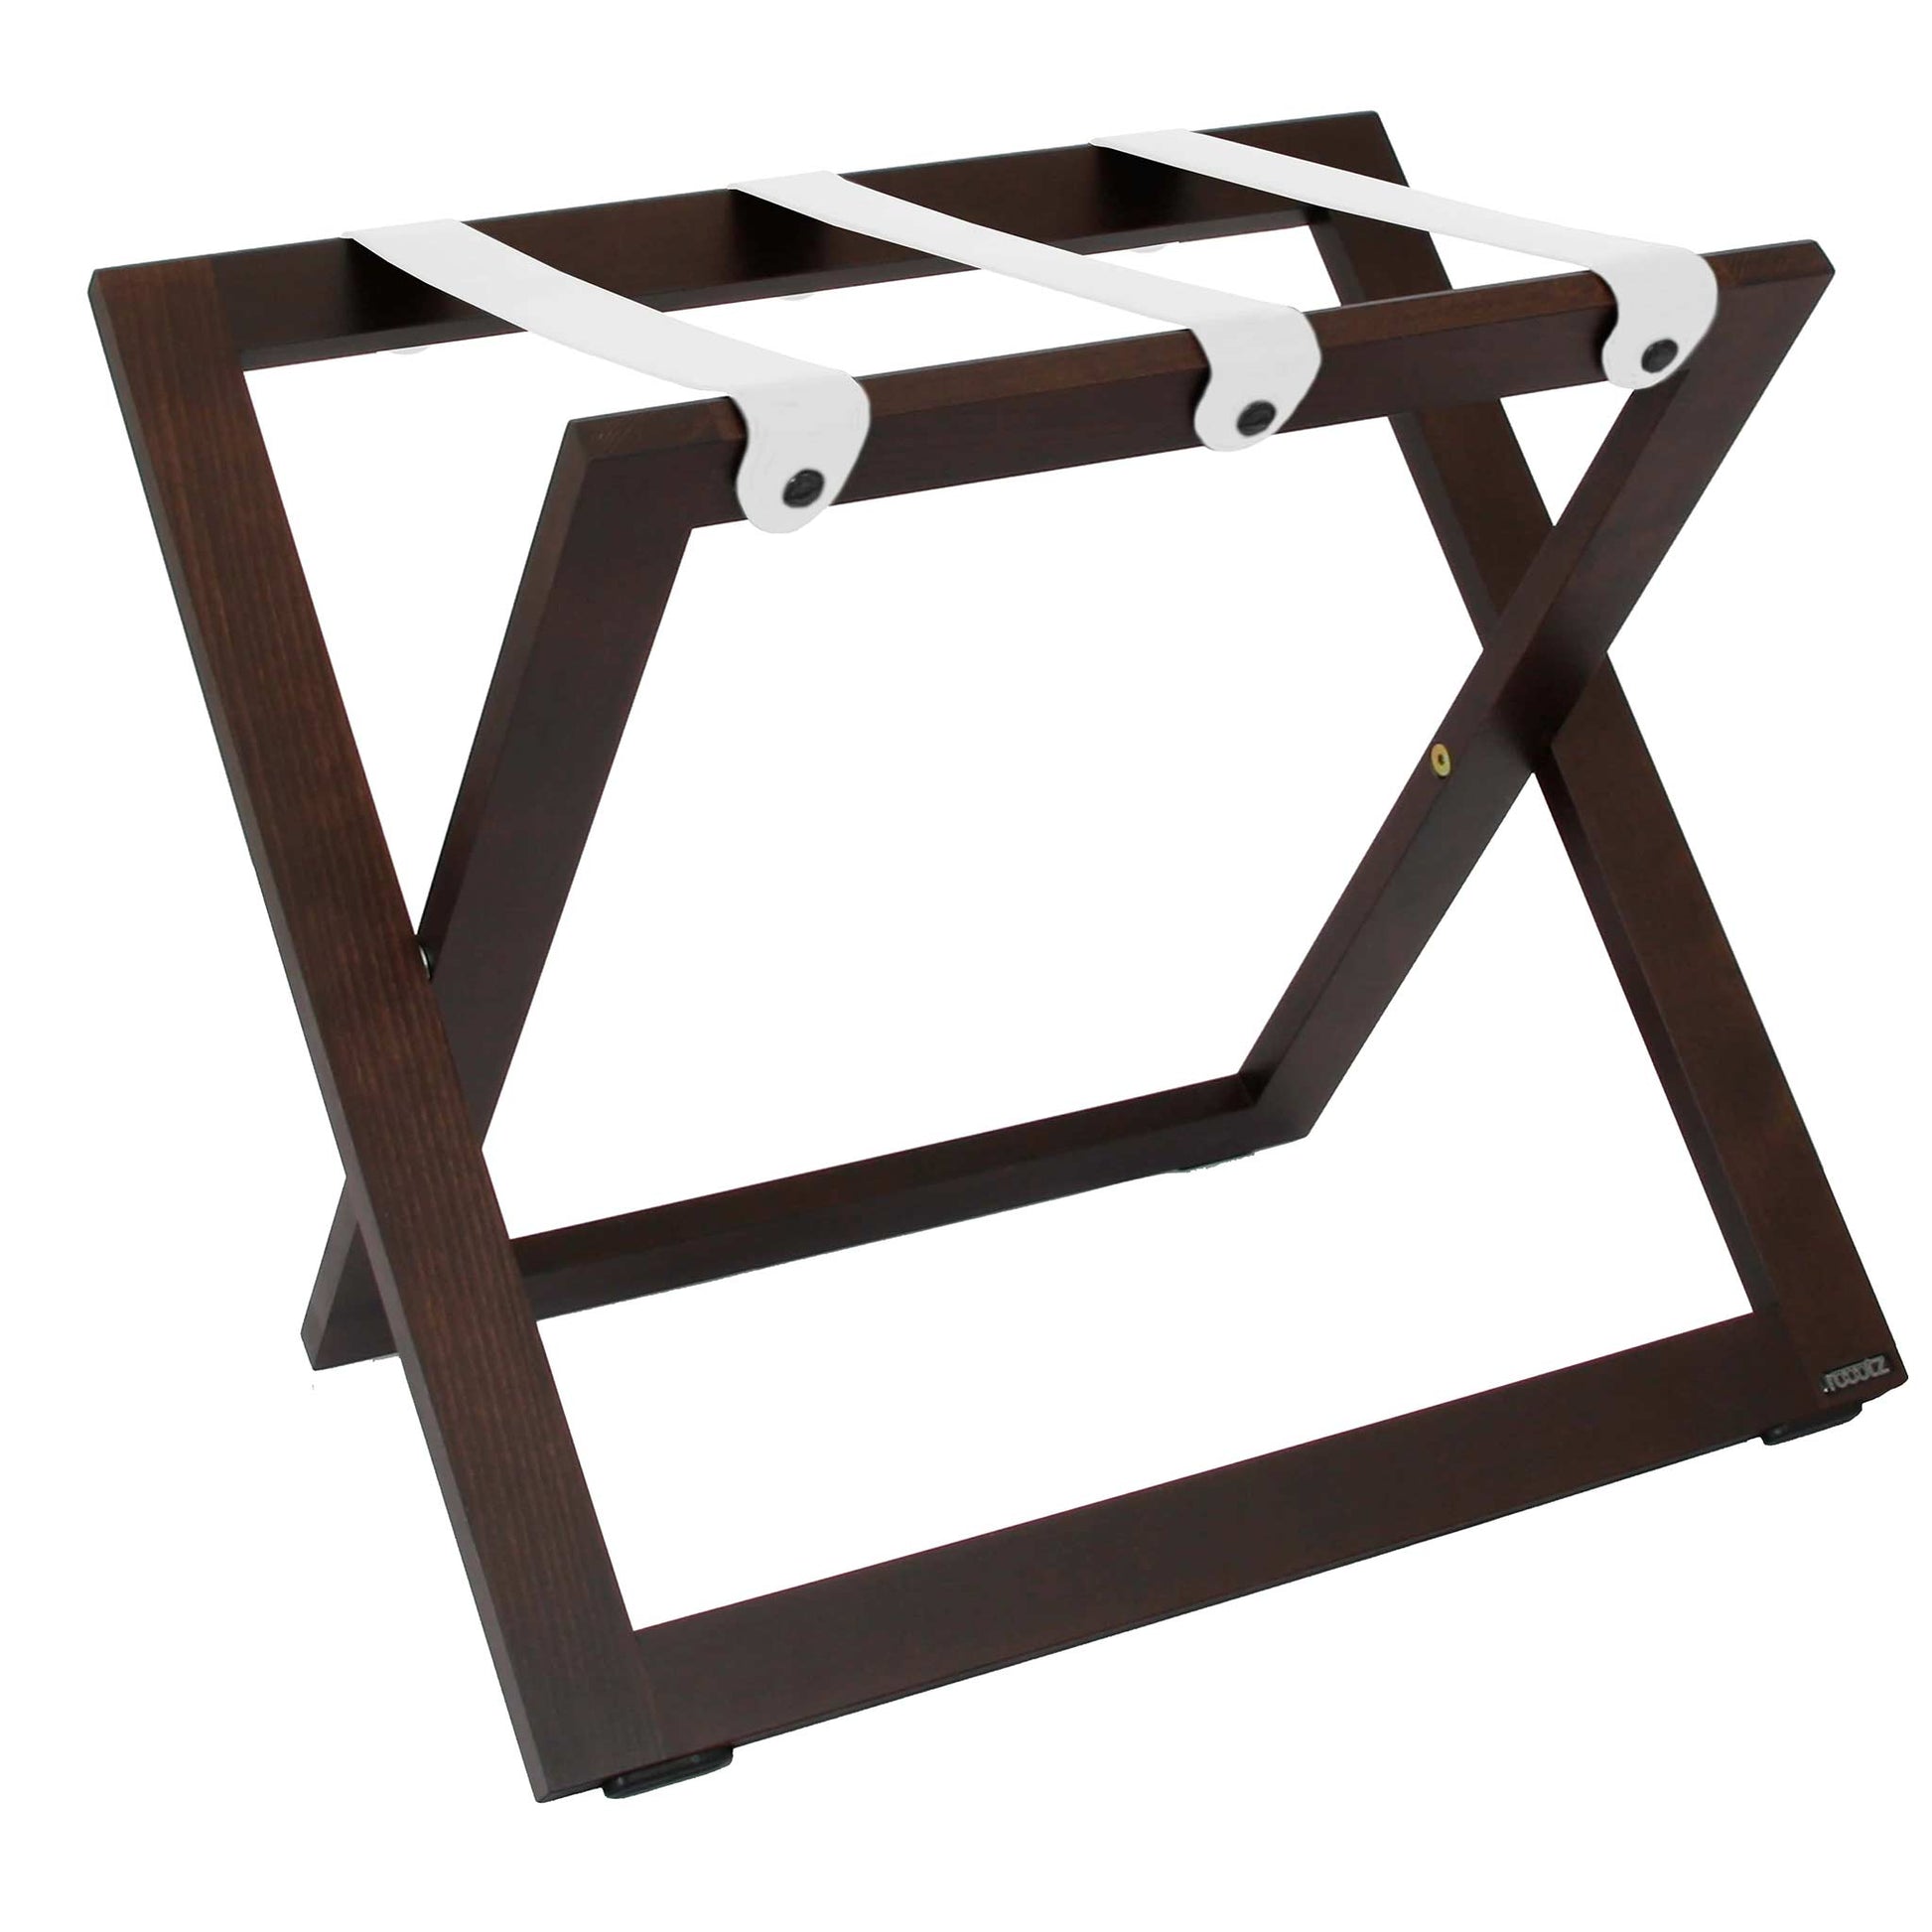 Roootz compact walnut wooden hotel luggage rack with white leather straps